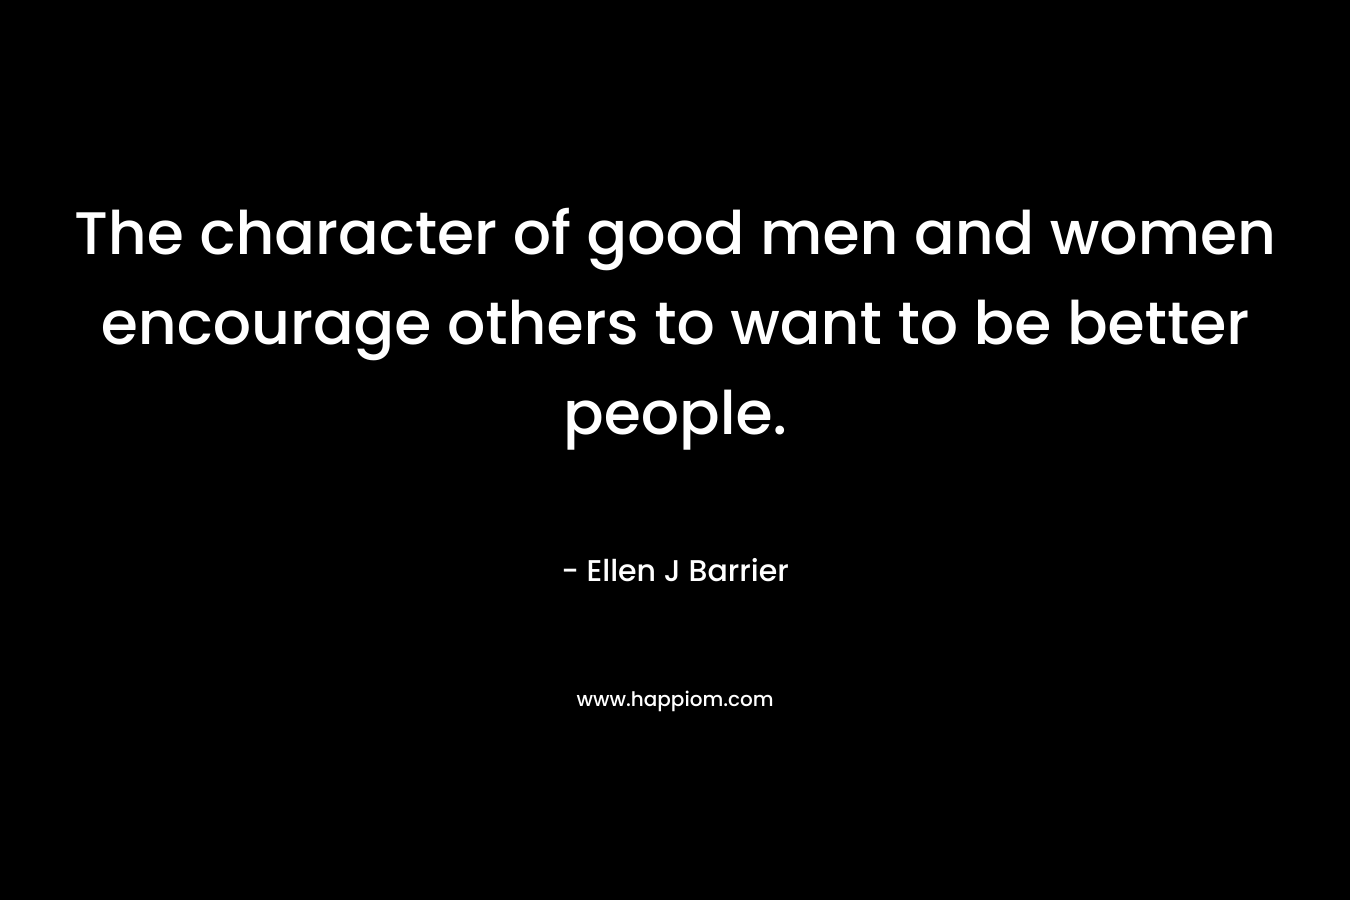 The character of good men and women encourage others to want to be better people.